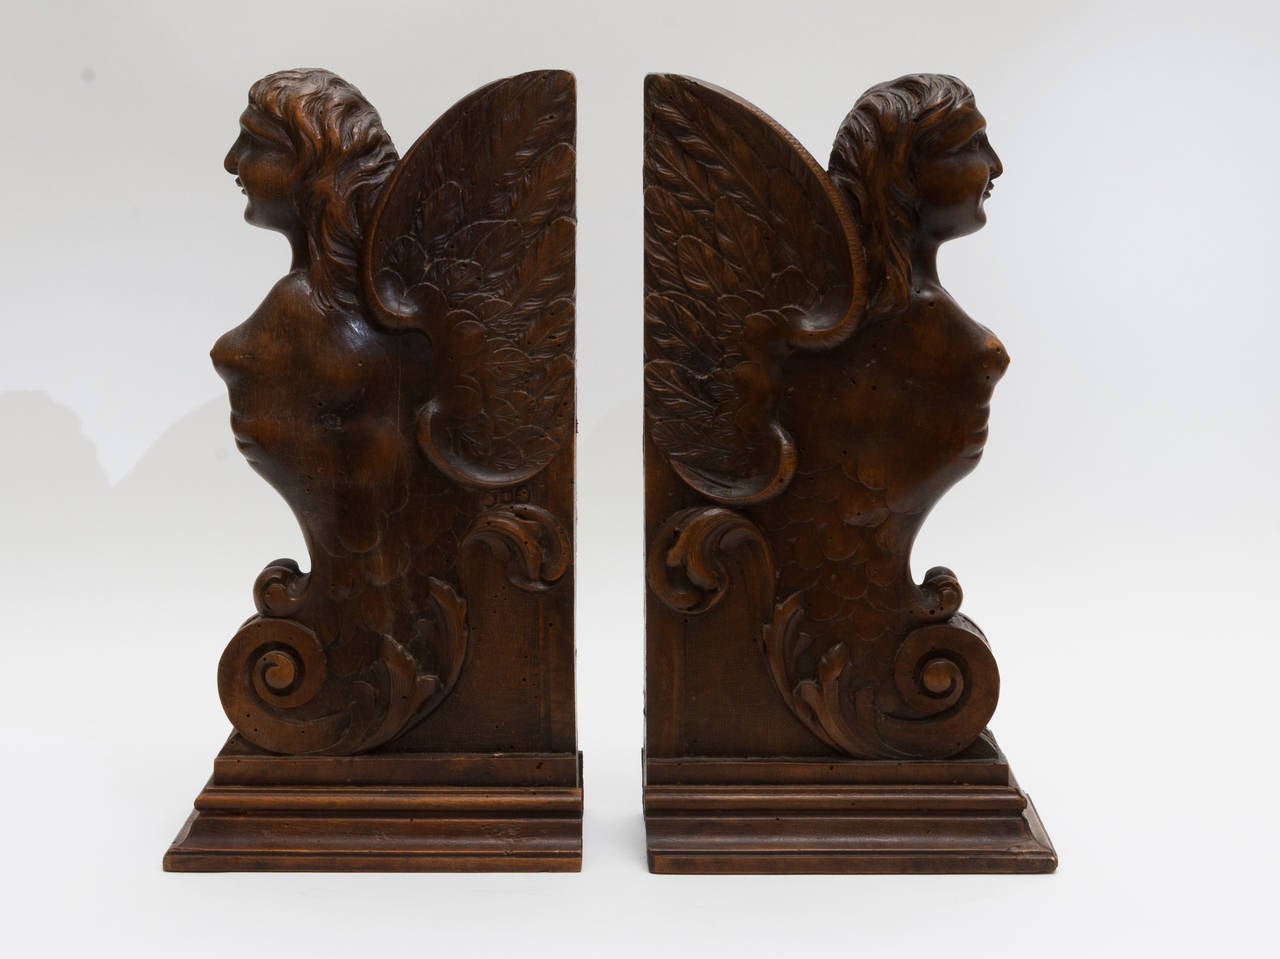 Beautiful pair of walnut carved bookend Sphinxes. Would go great any office from modern to traditional.